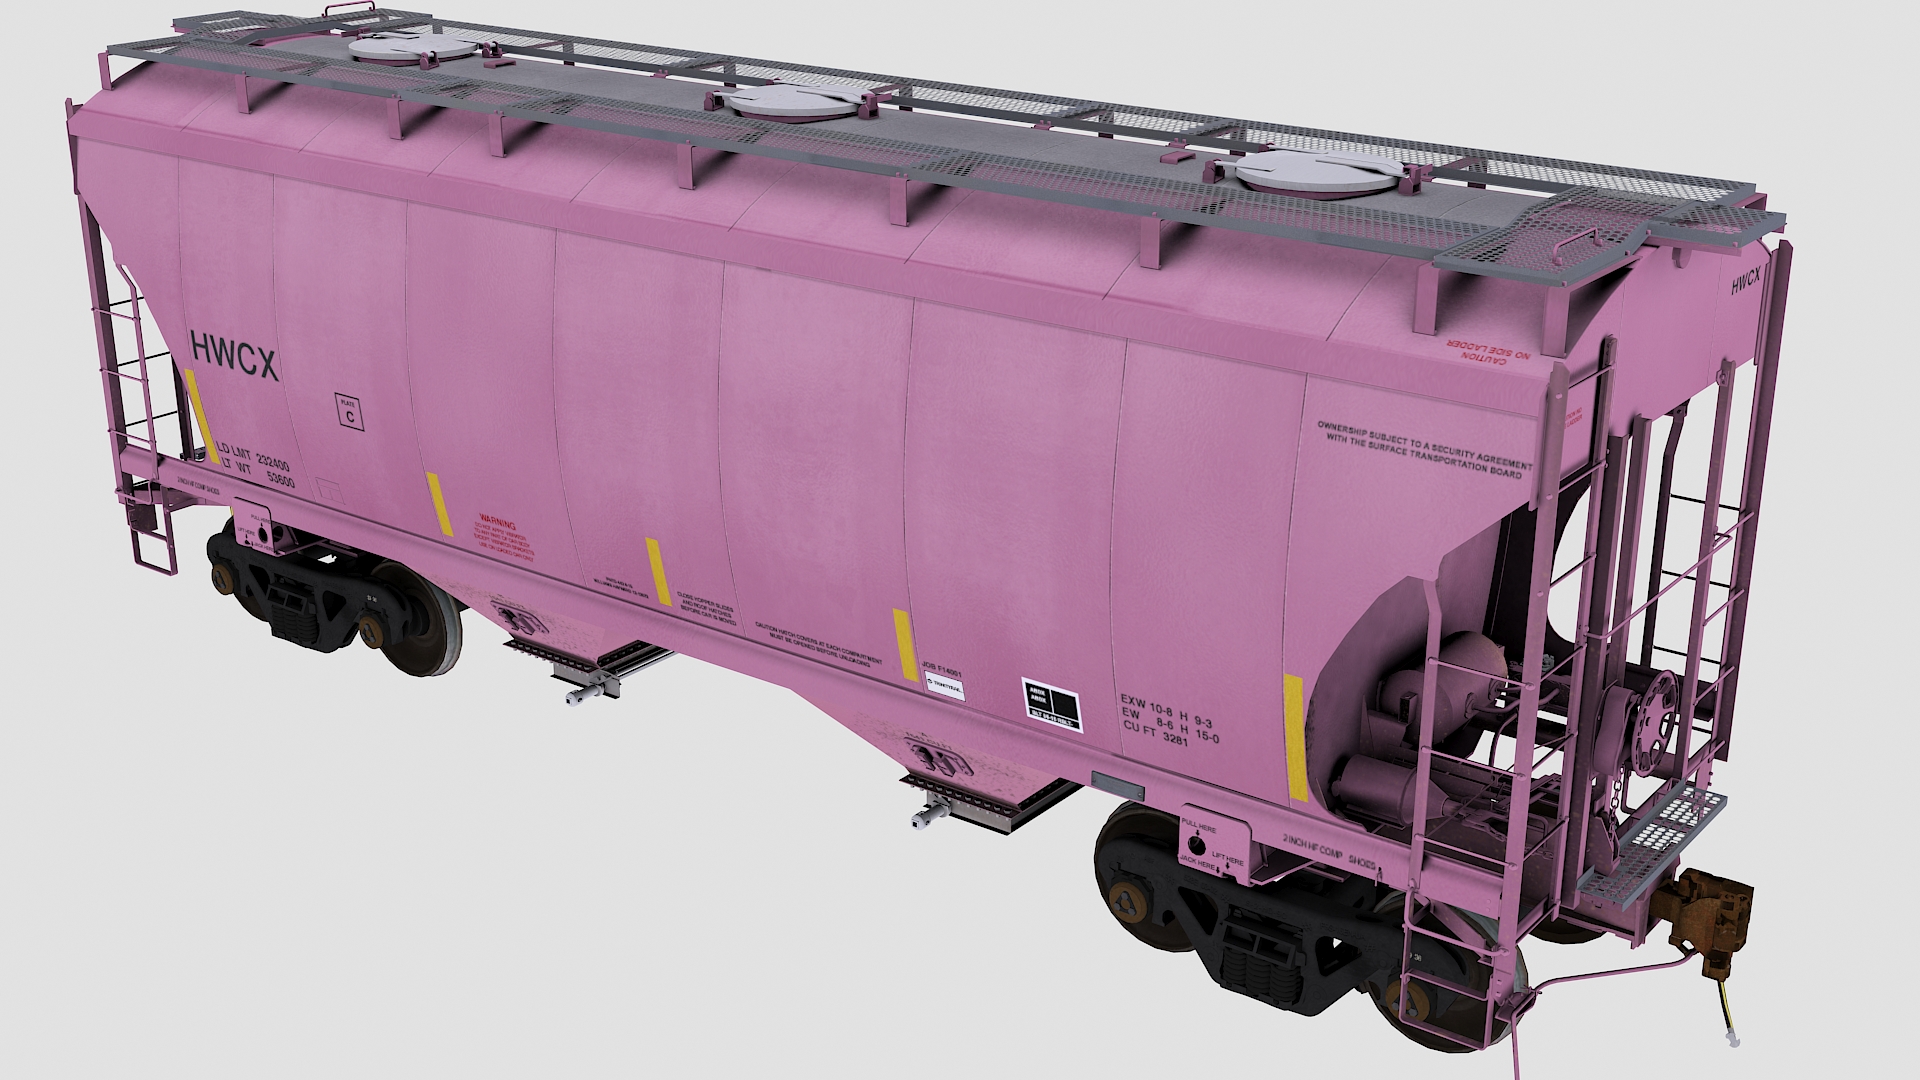 A pink, hwcx, two bay covered hopper